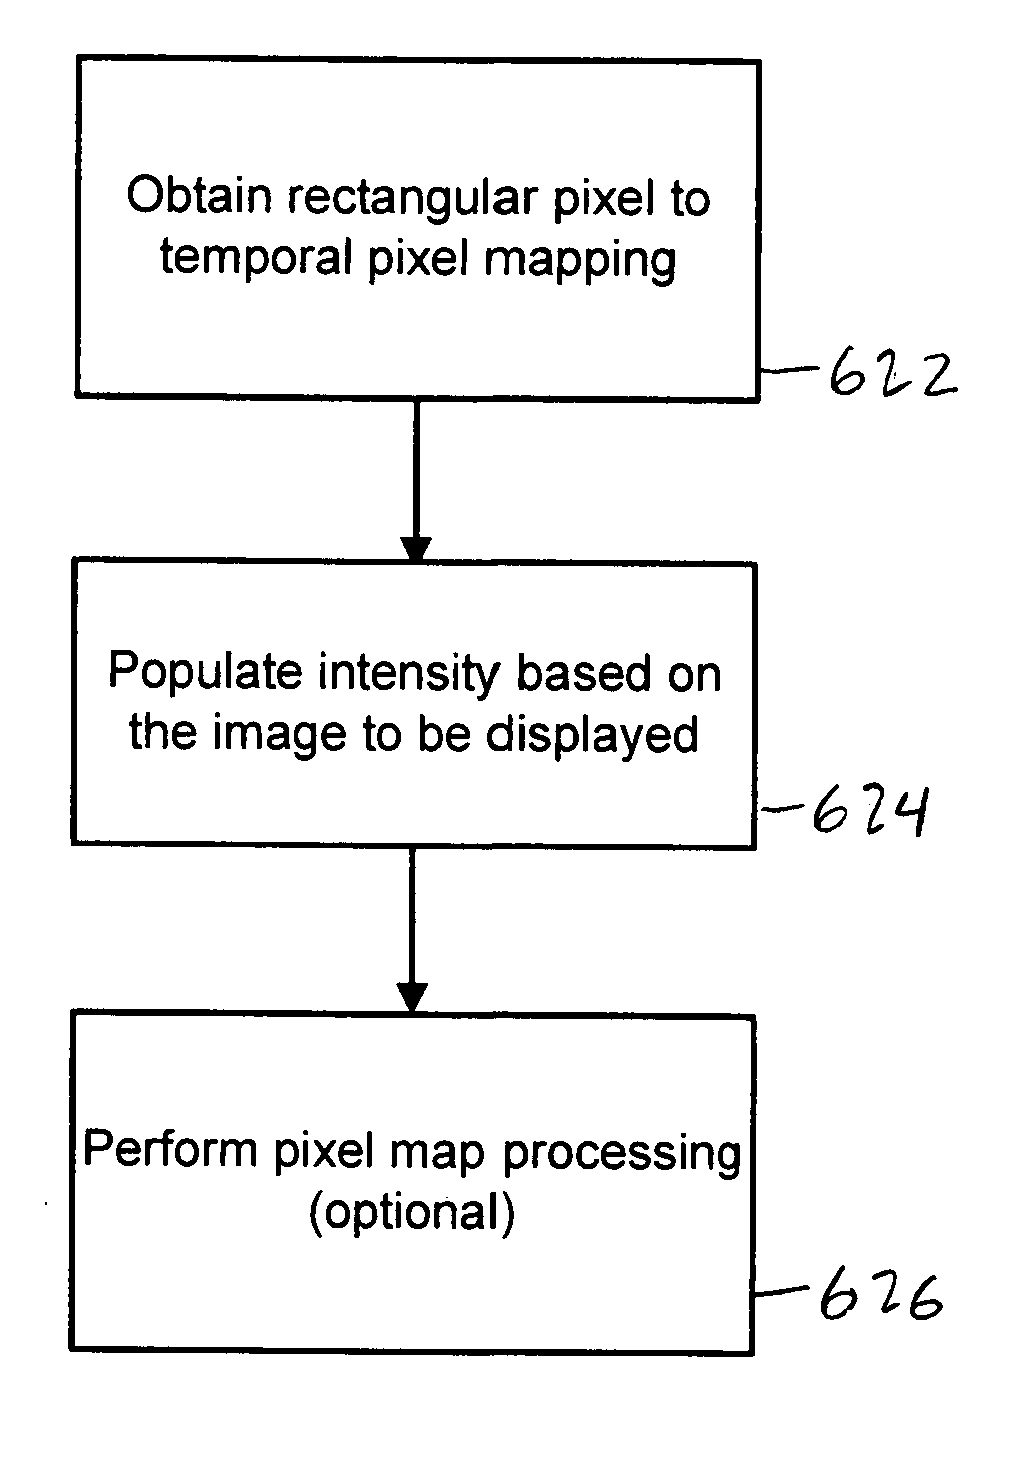 Image to temporal pixel mapping